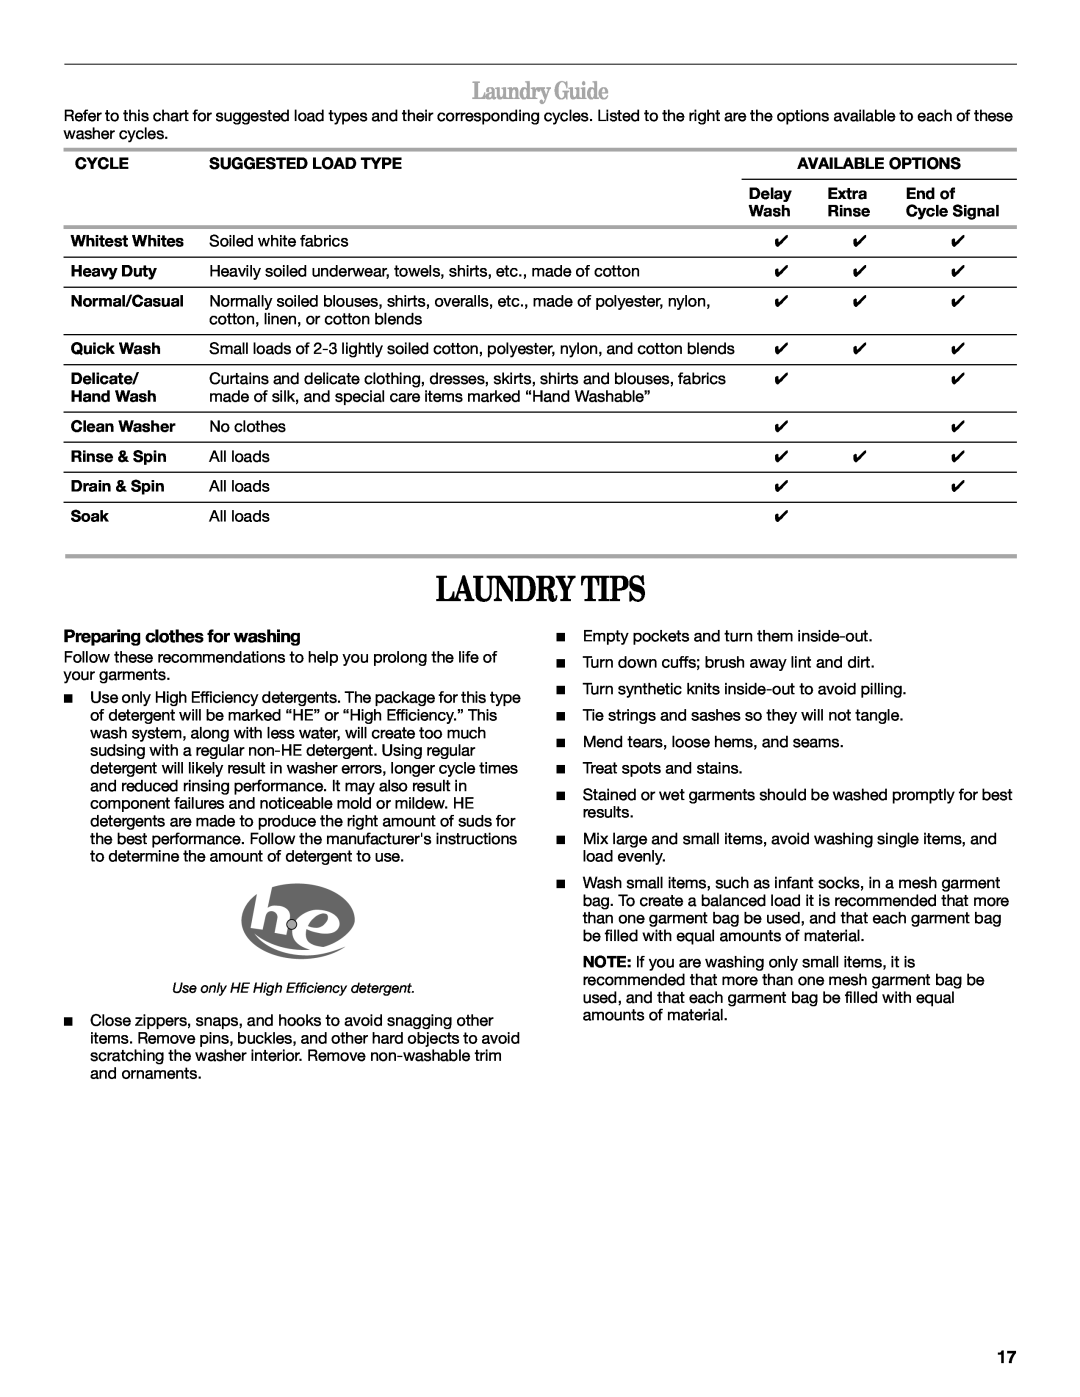 Whirlpool W10063560 manual Laundry Tips, LaundryGuide, Preparing clothes for washing 